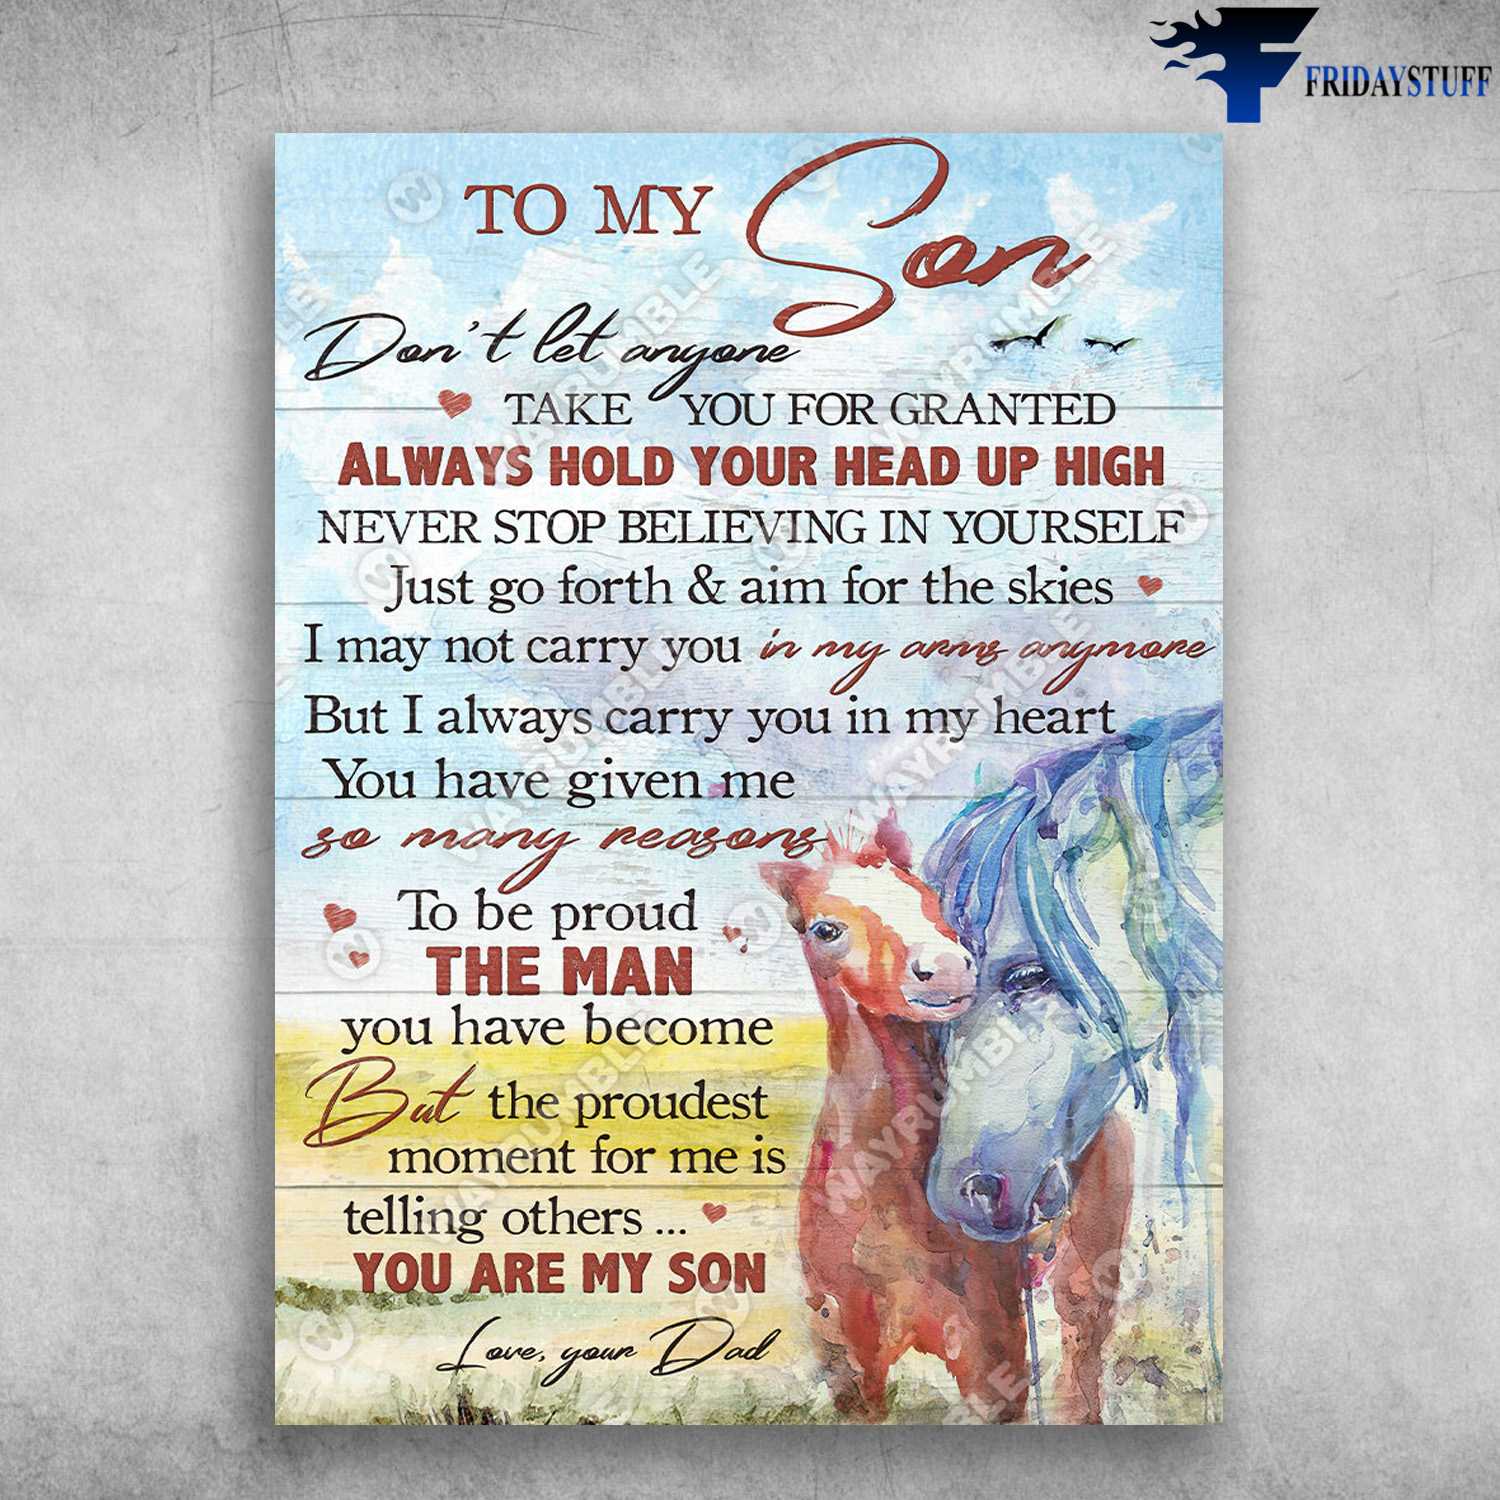 Horse Poster, Dad And Son, To My Son, Don't Let Anyone Take You For Granted, Always Hold Your Head Up High, Never Stop Believing In Yourself, Just Go Forth And Aim For The Skies